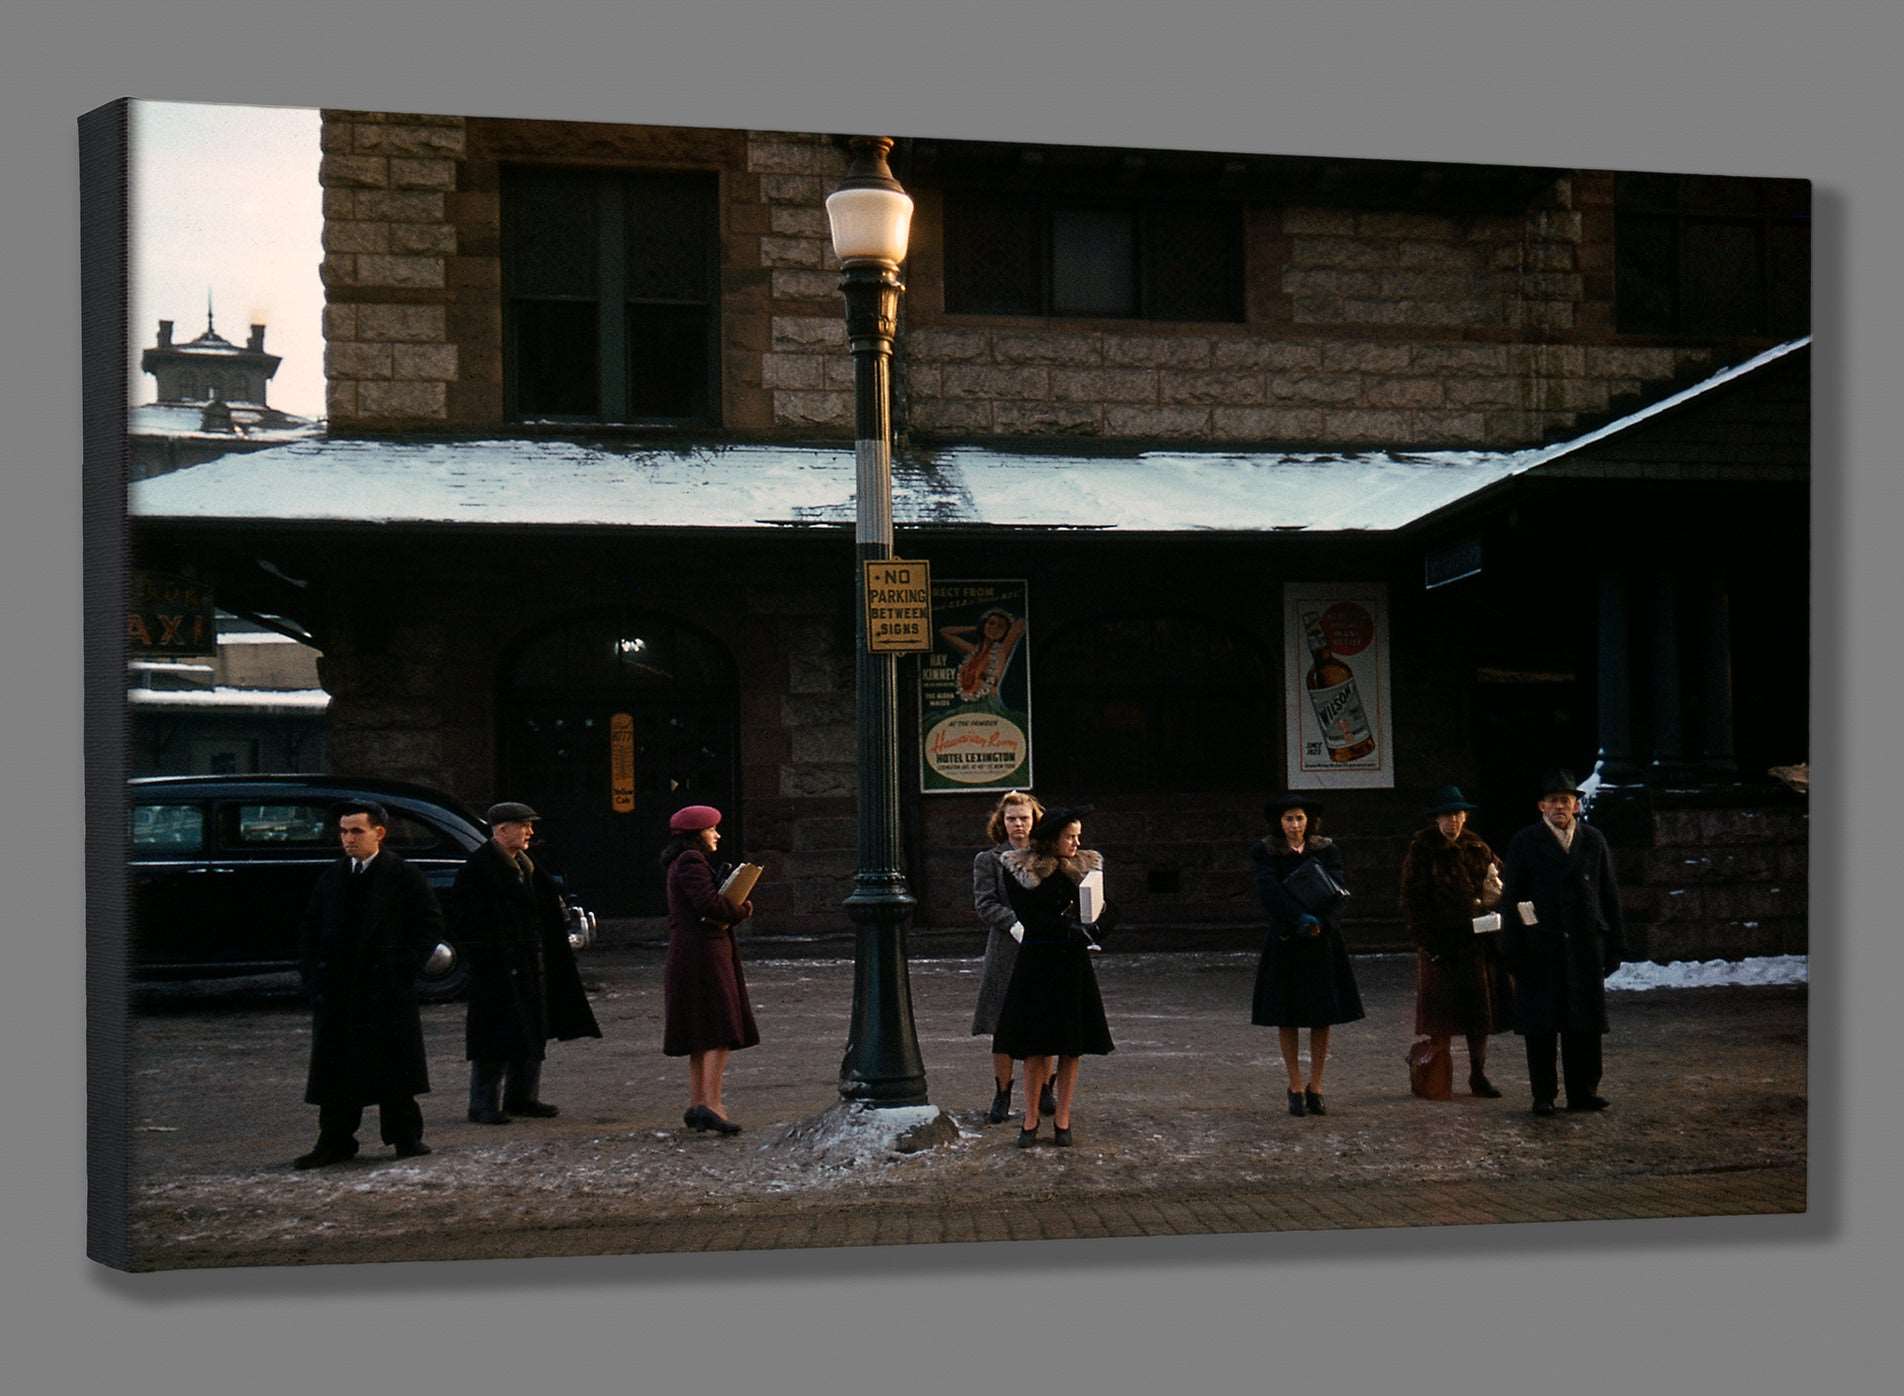 A fine art canvas reproduction print of a vintage photograph of commuters in Lowell, Massachusetts